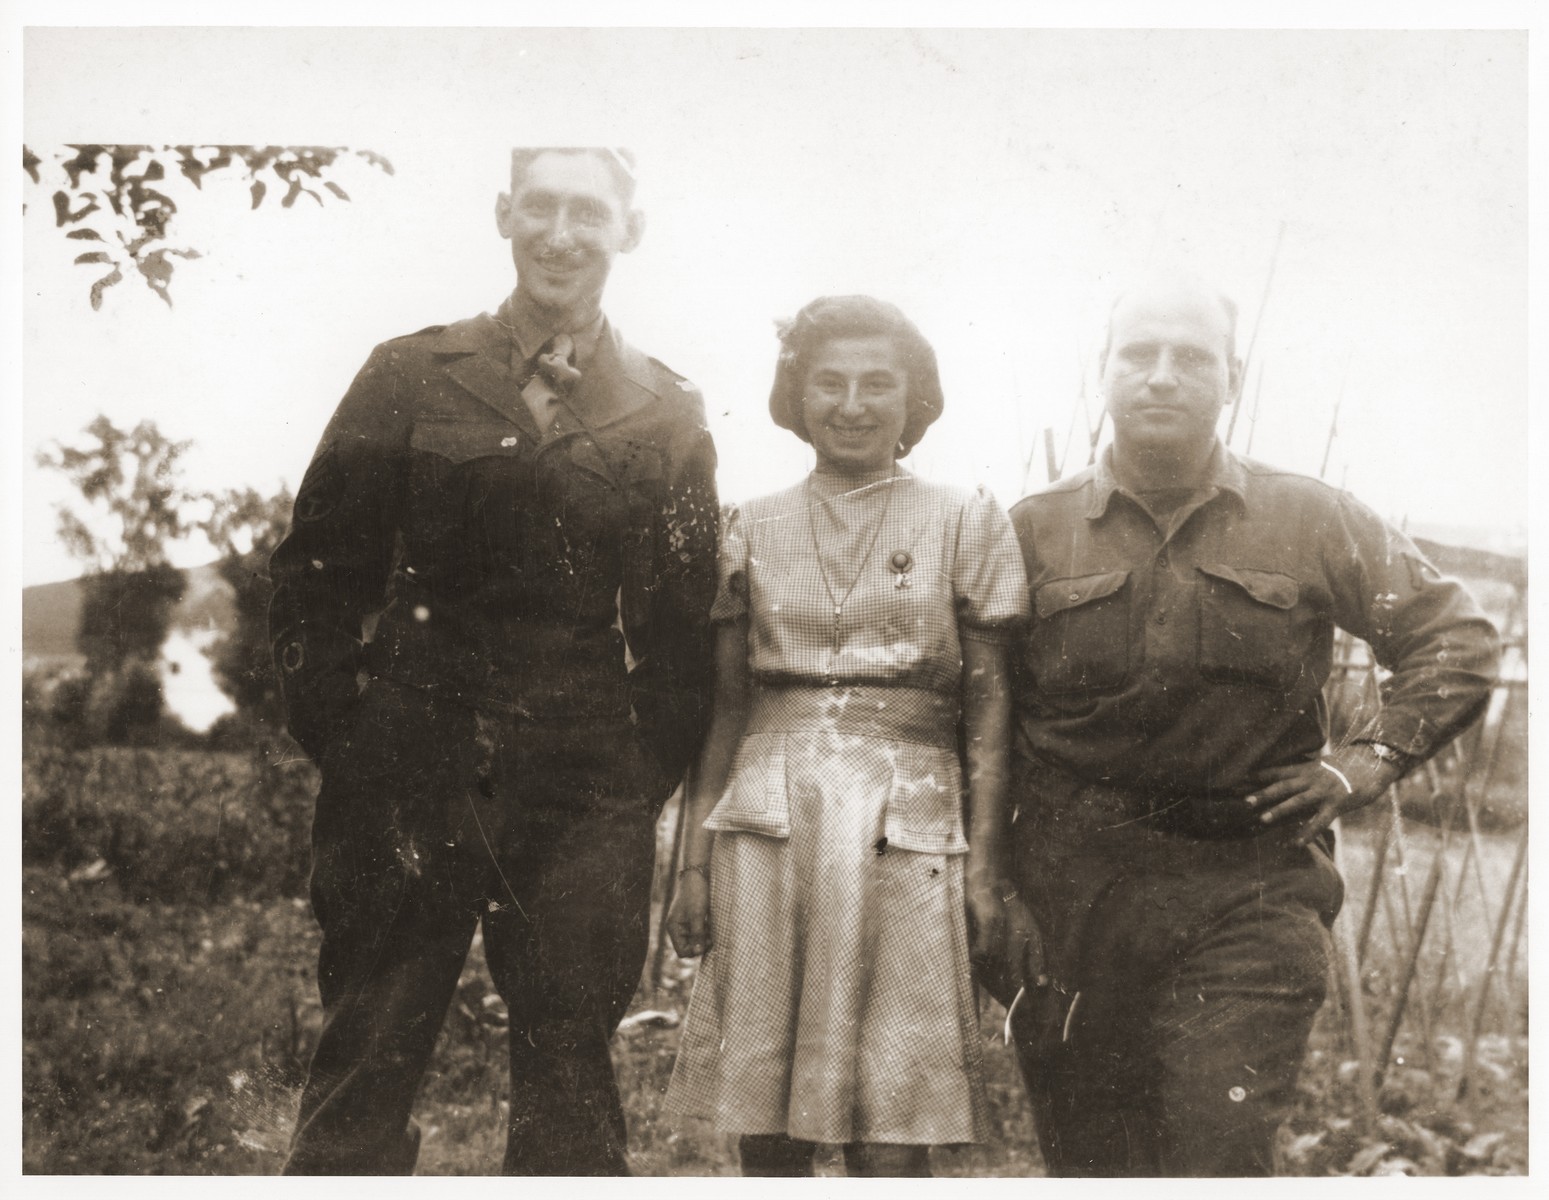 Two Jewish American soldiers from the 3rd U.S. Army pose with Halina Goldberg from Czestochowa.  

Halina was one of approximately 150 Jewish women sent on a 500 km. death march that ended in Volary. The survivors recouperated in Prachatice, near Volary.